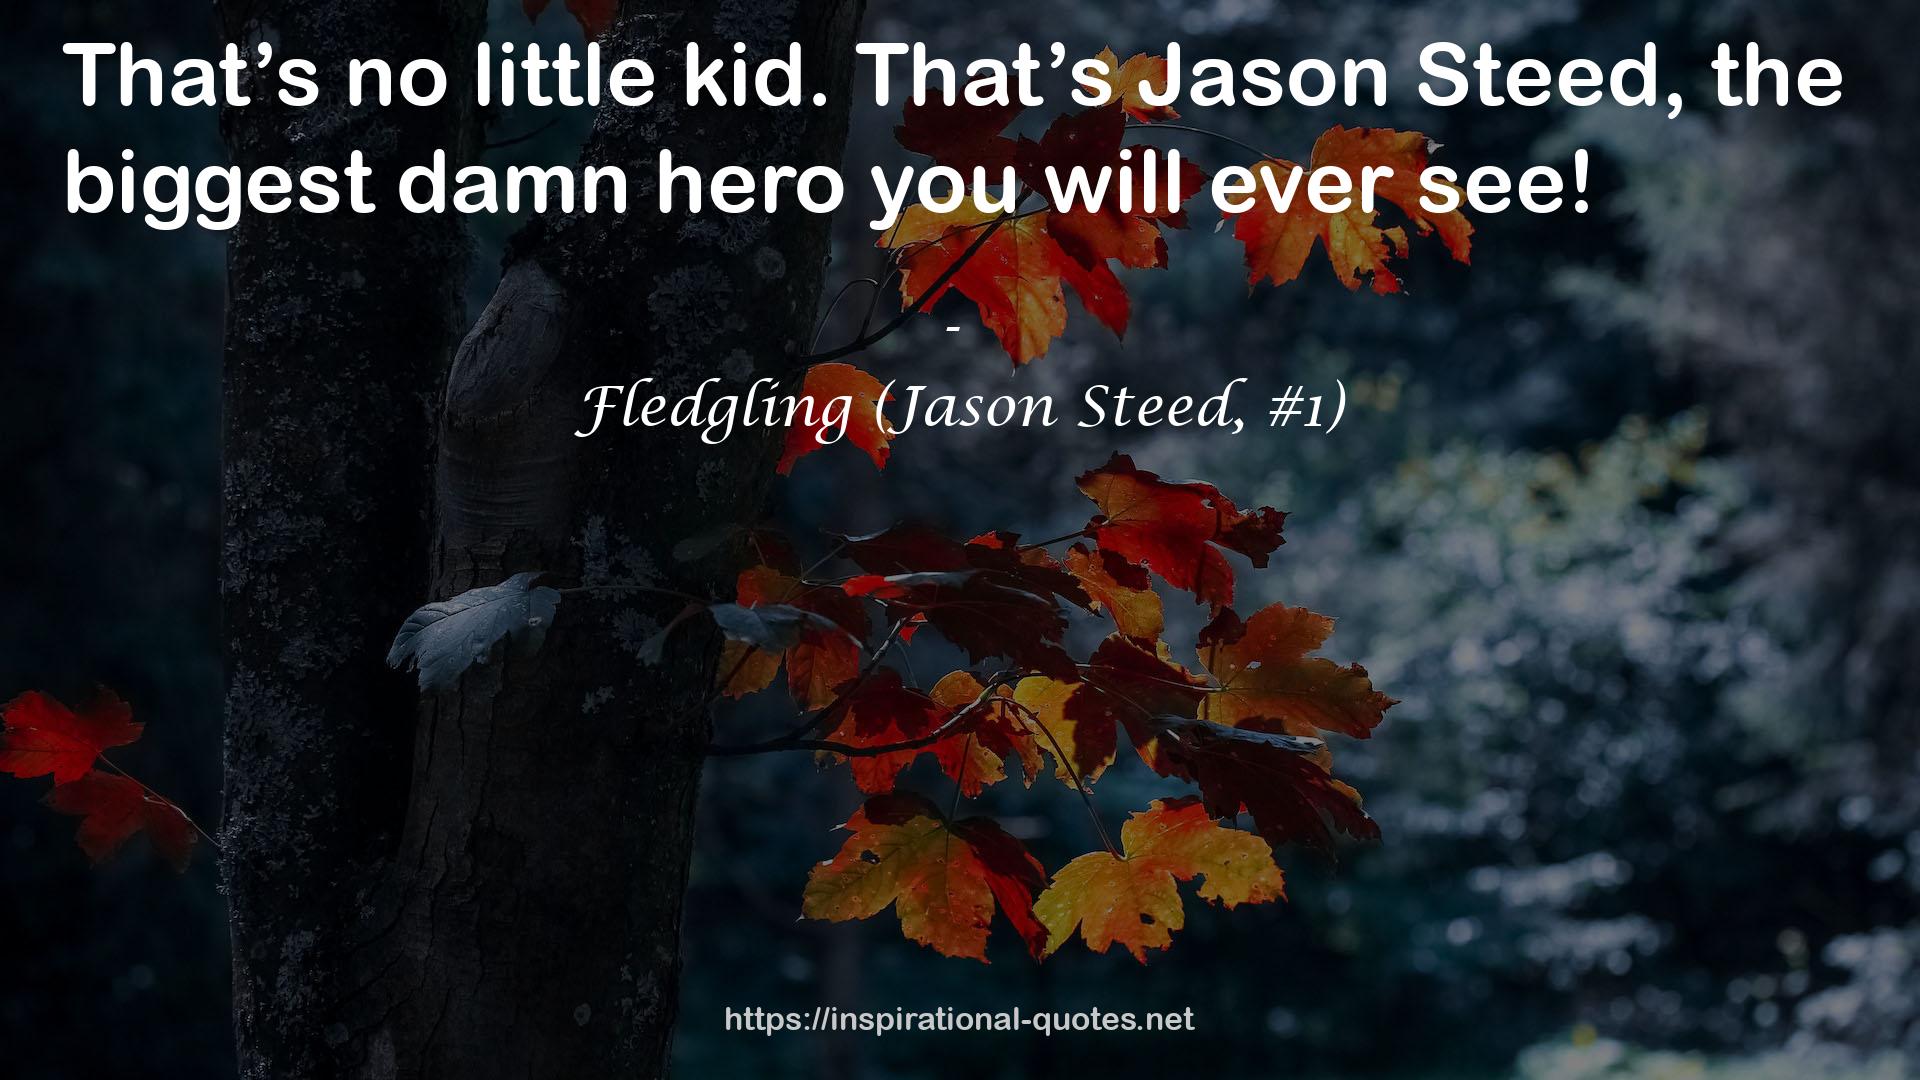 Fledgling (Jason Steed, #1) QUOTES